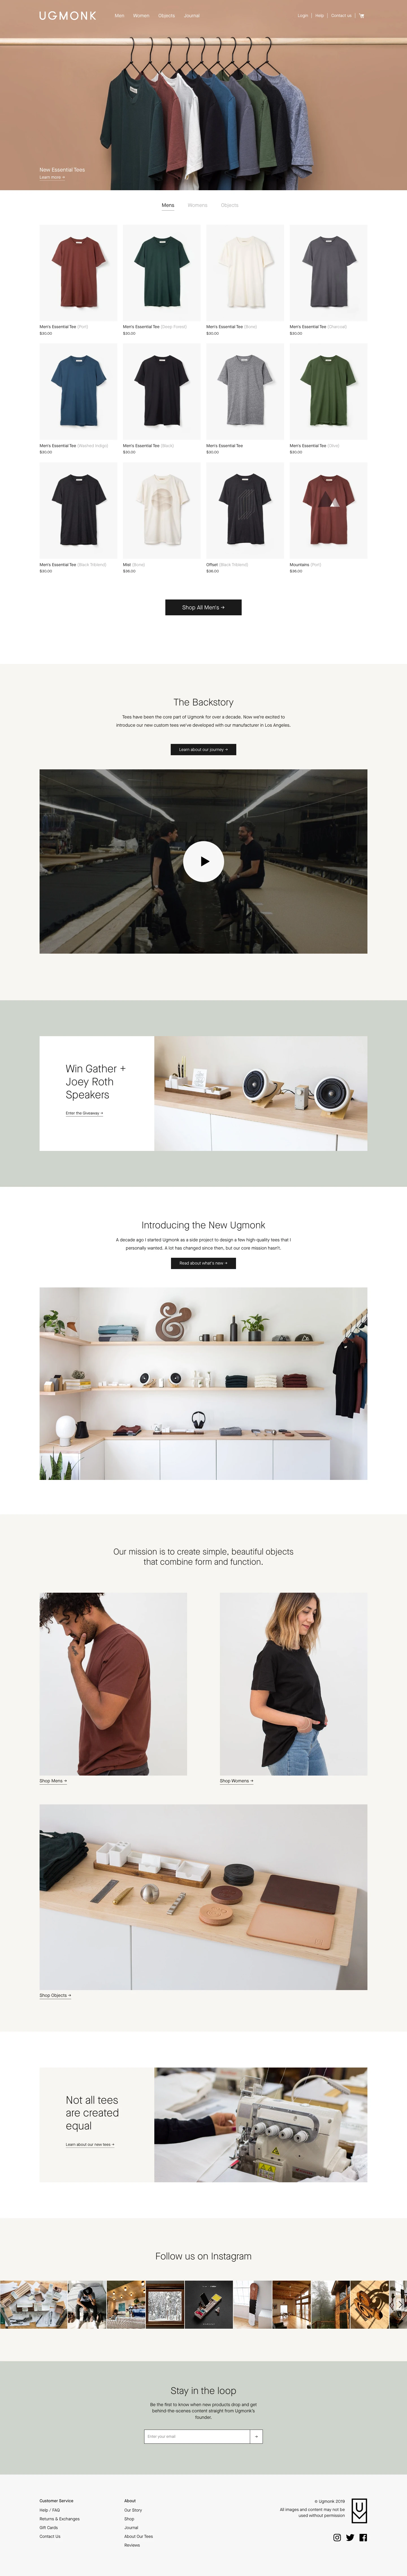 Ugmonk Landing Page Example: Ugmonk was founded by designer Jeff Sheldon with a mission to produce high-quality products with simple, fresh designs.